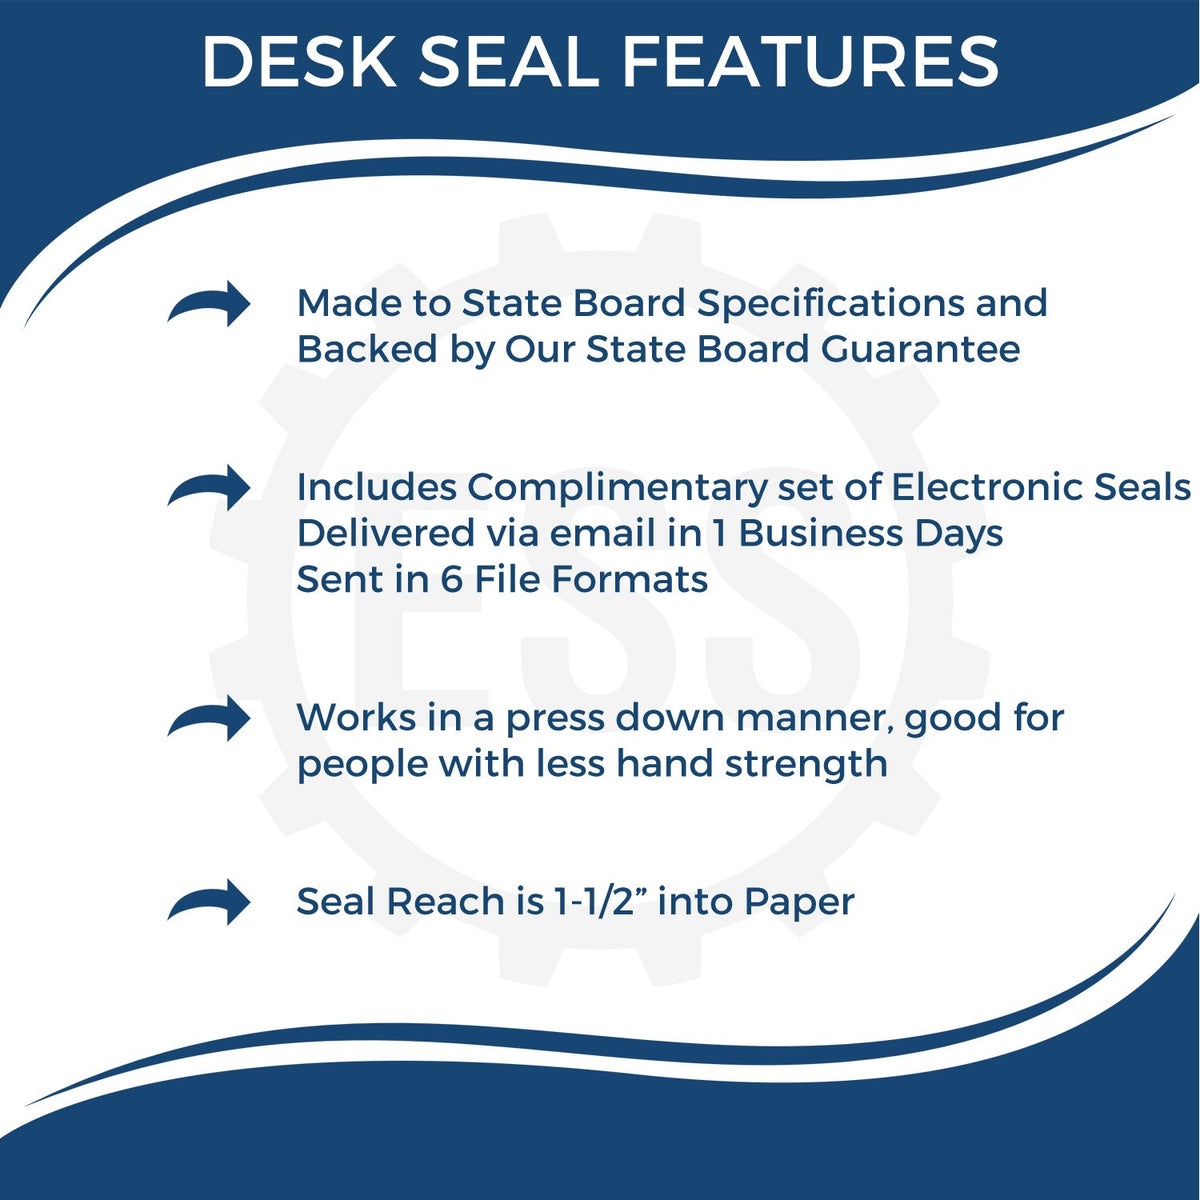 A picture of an infographic highlighting the selling points for the Nevada Engineer Desk Seal